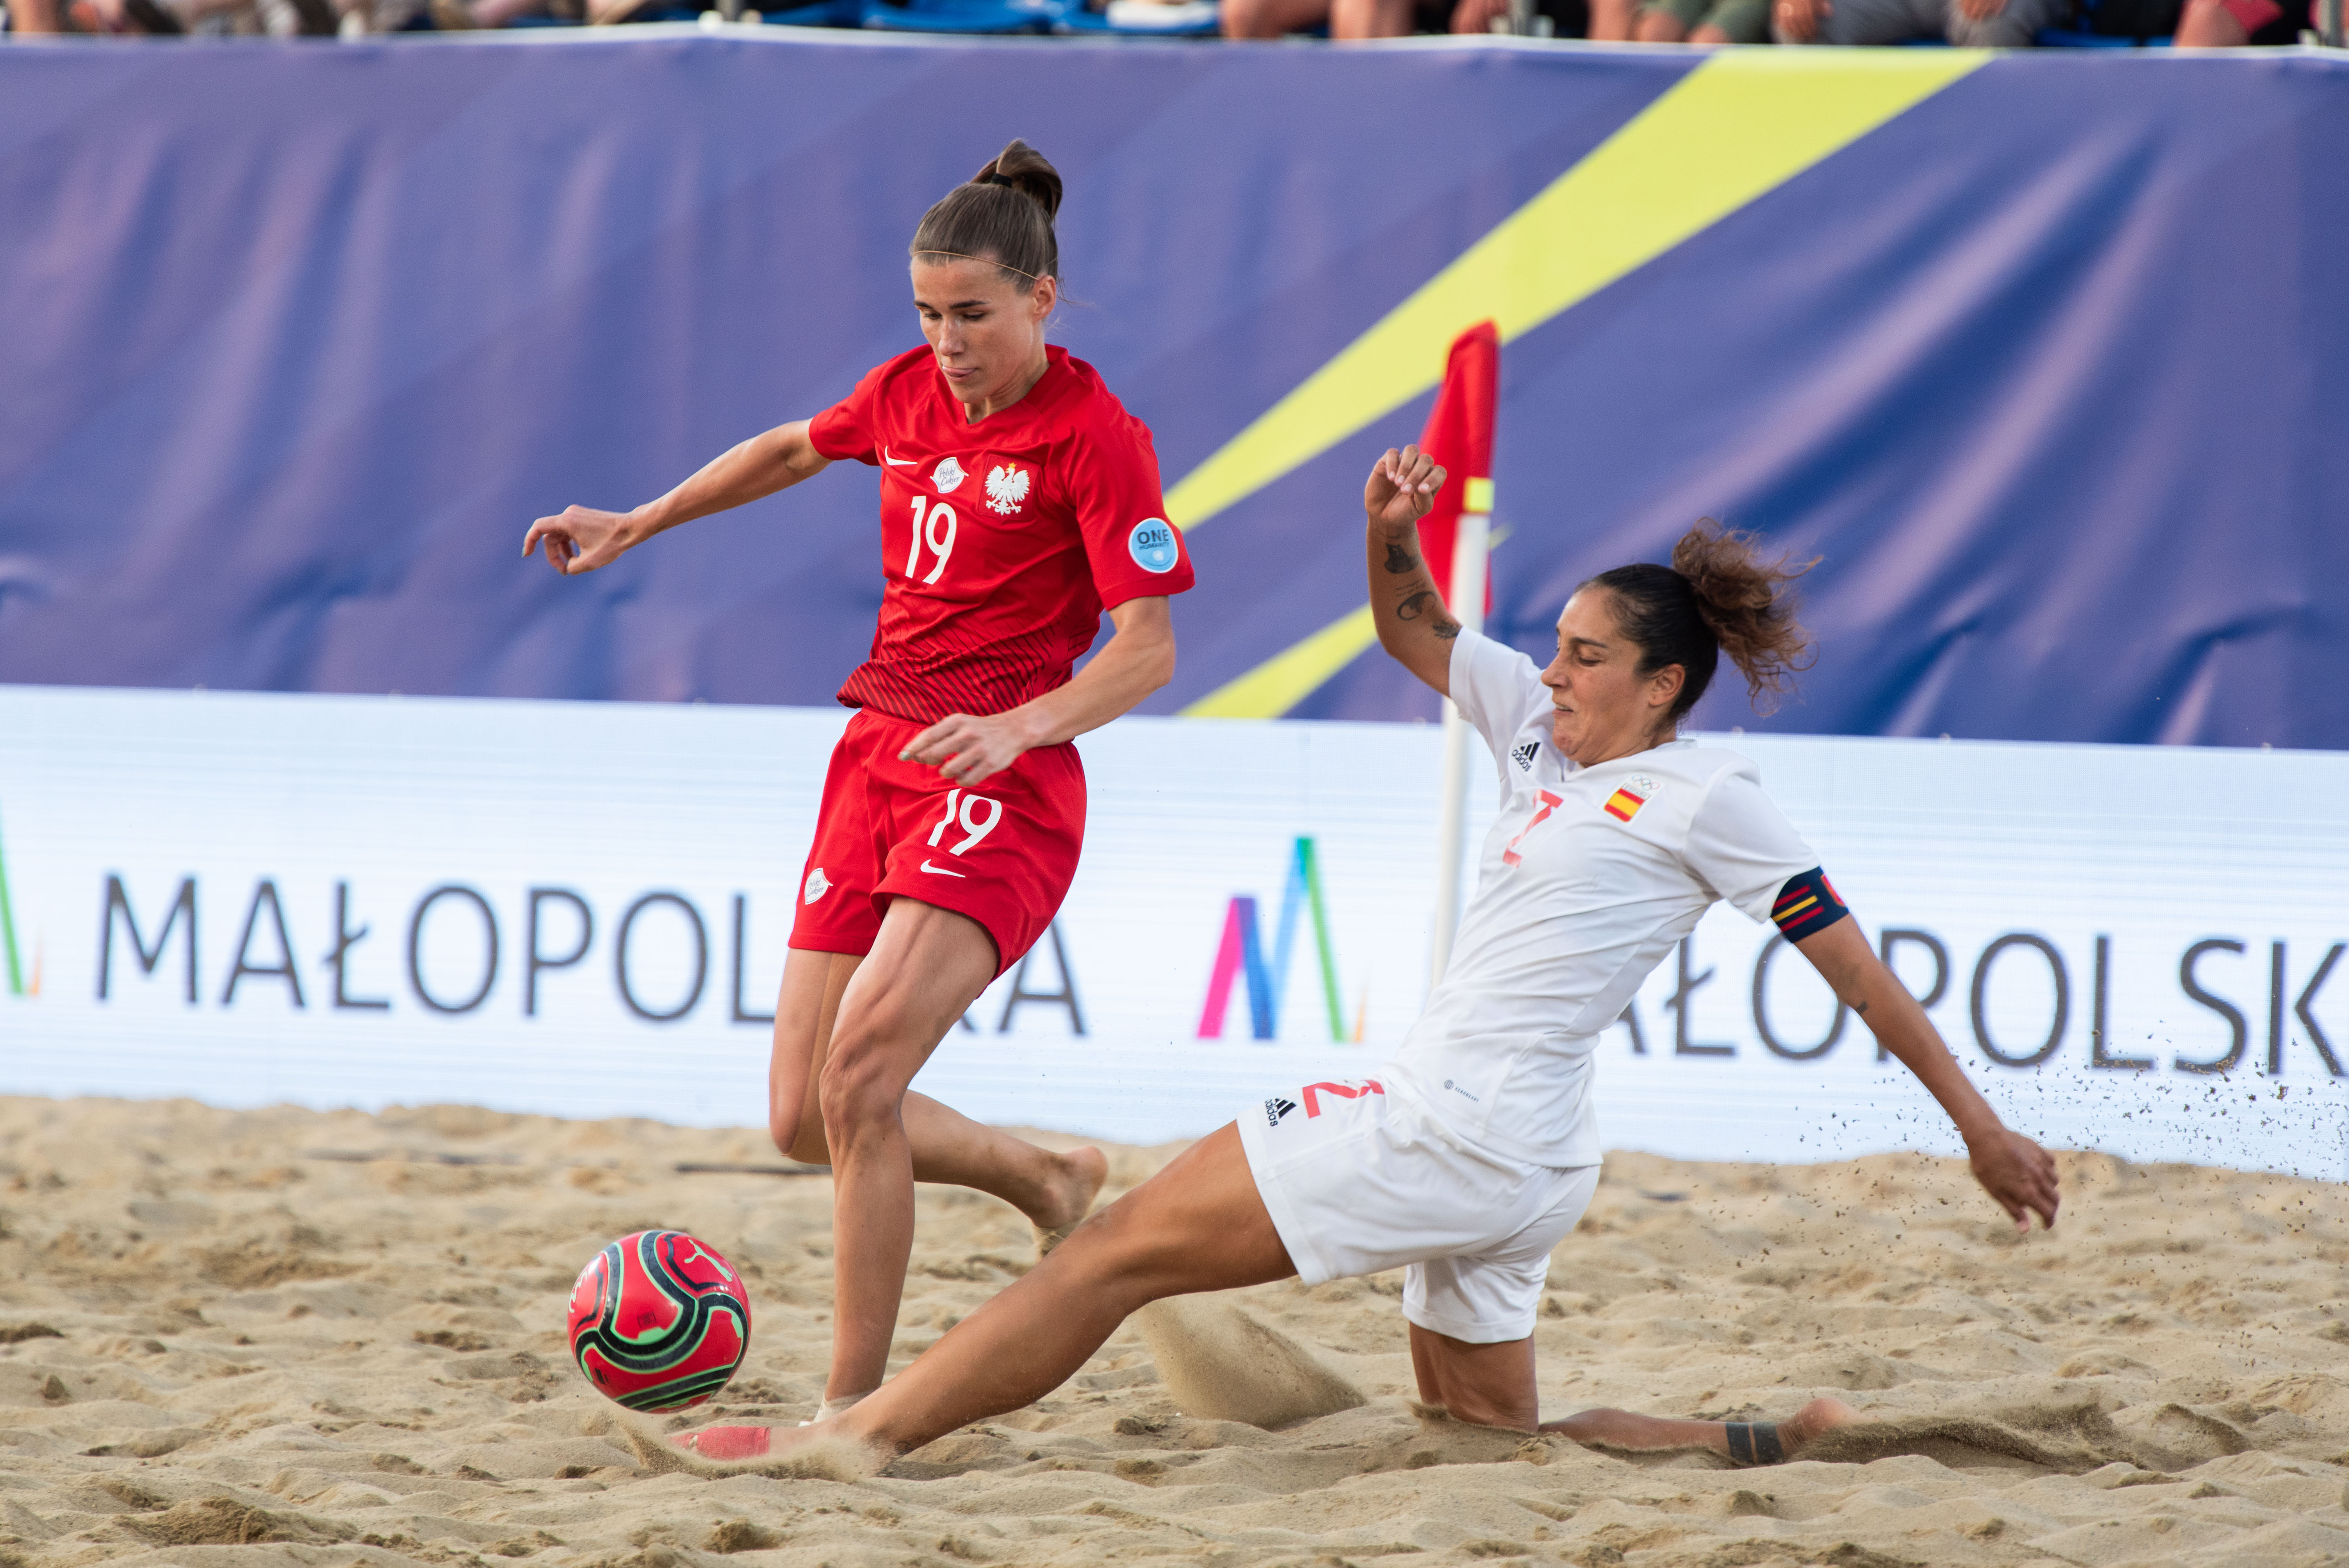 Beach soccer final not for the Poles. They will play for bronze